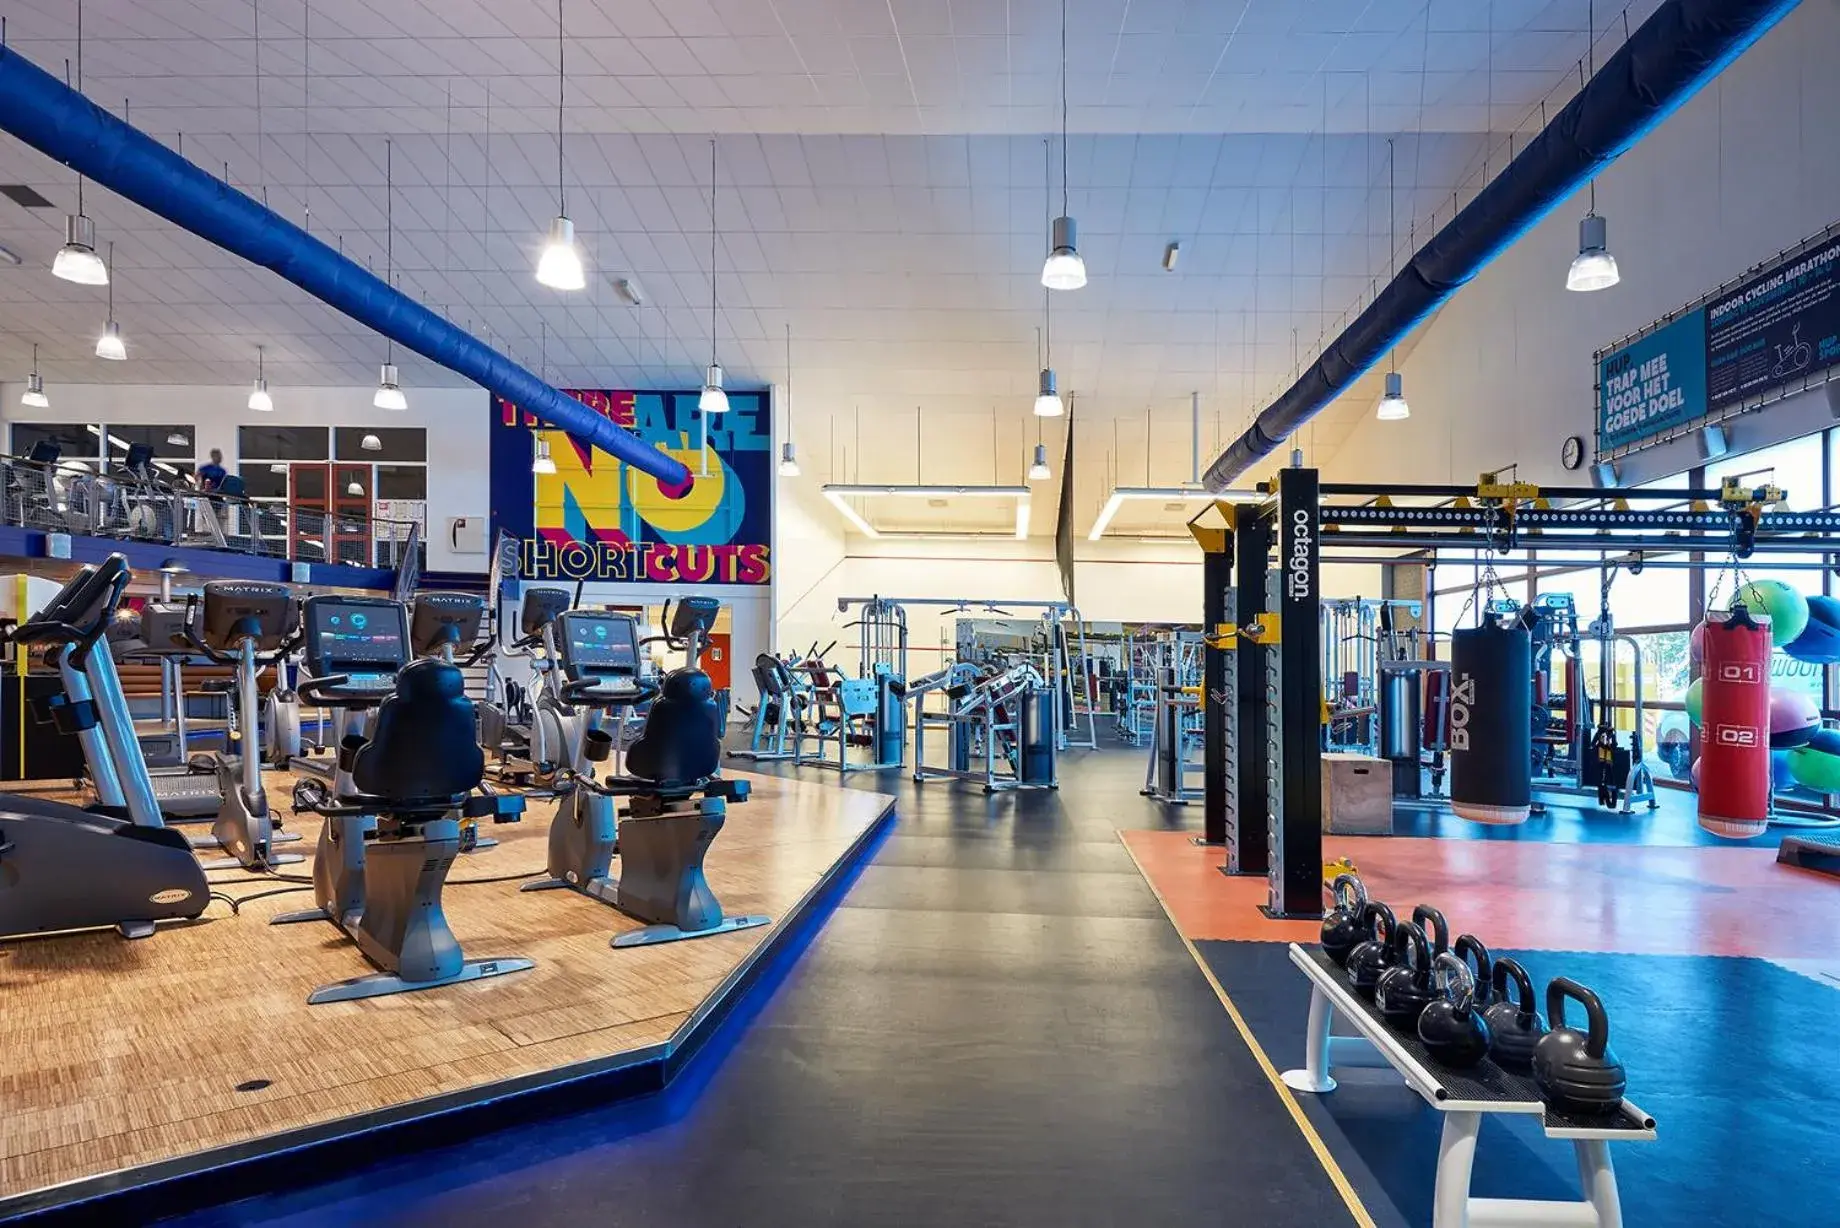 Fitness centre/facilities, Fitness Center/Facilities in HUP